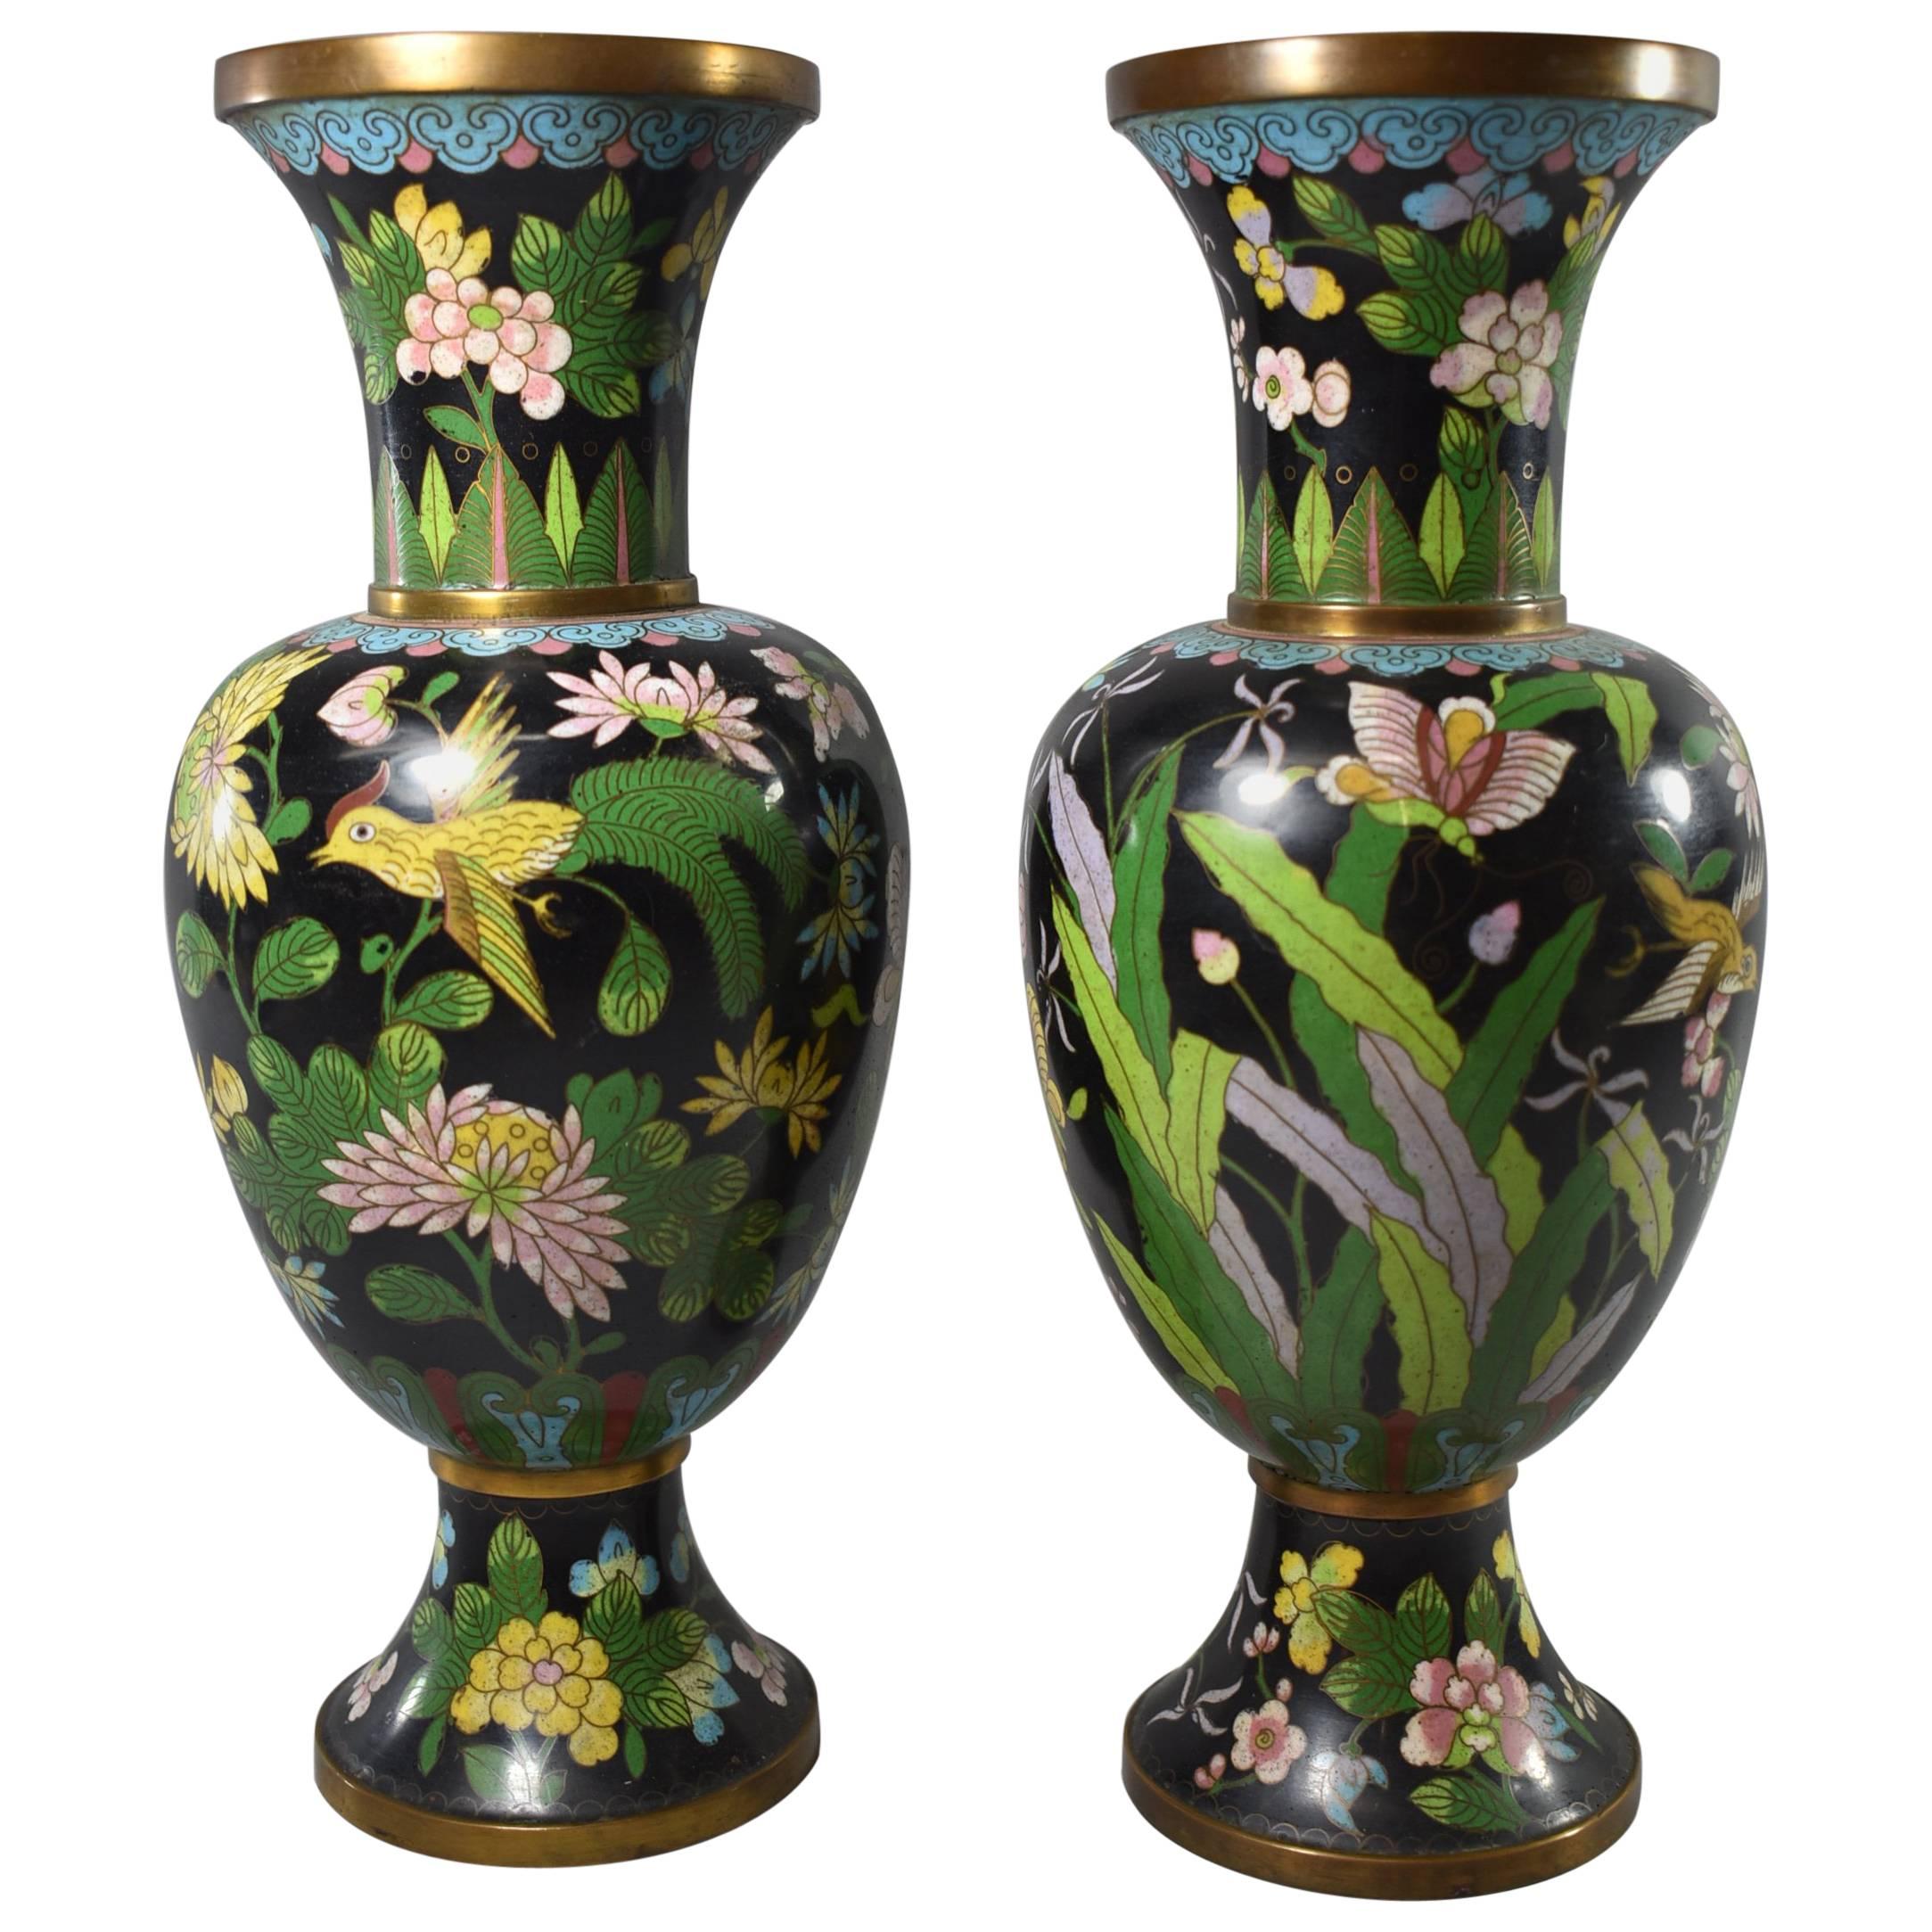 Pair of Black Chinese Cloisonne Vases with Birds and Butterflies